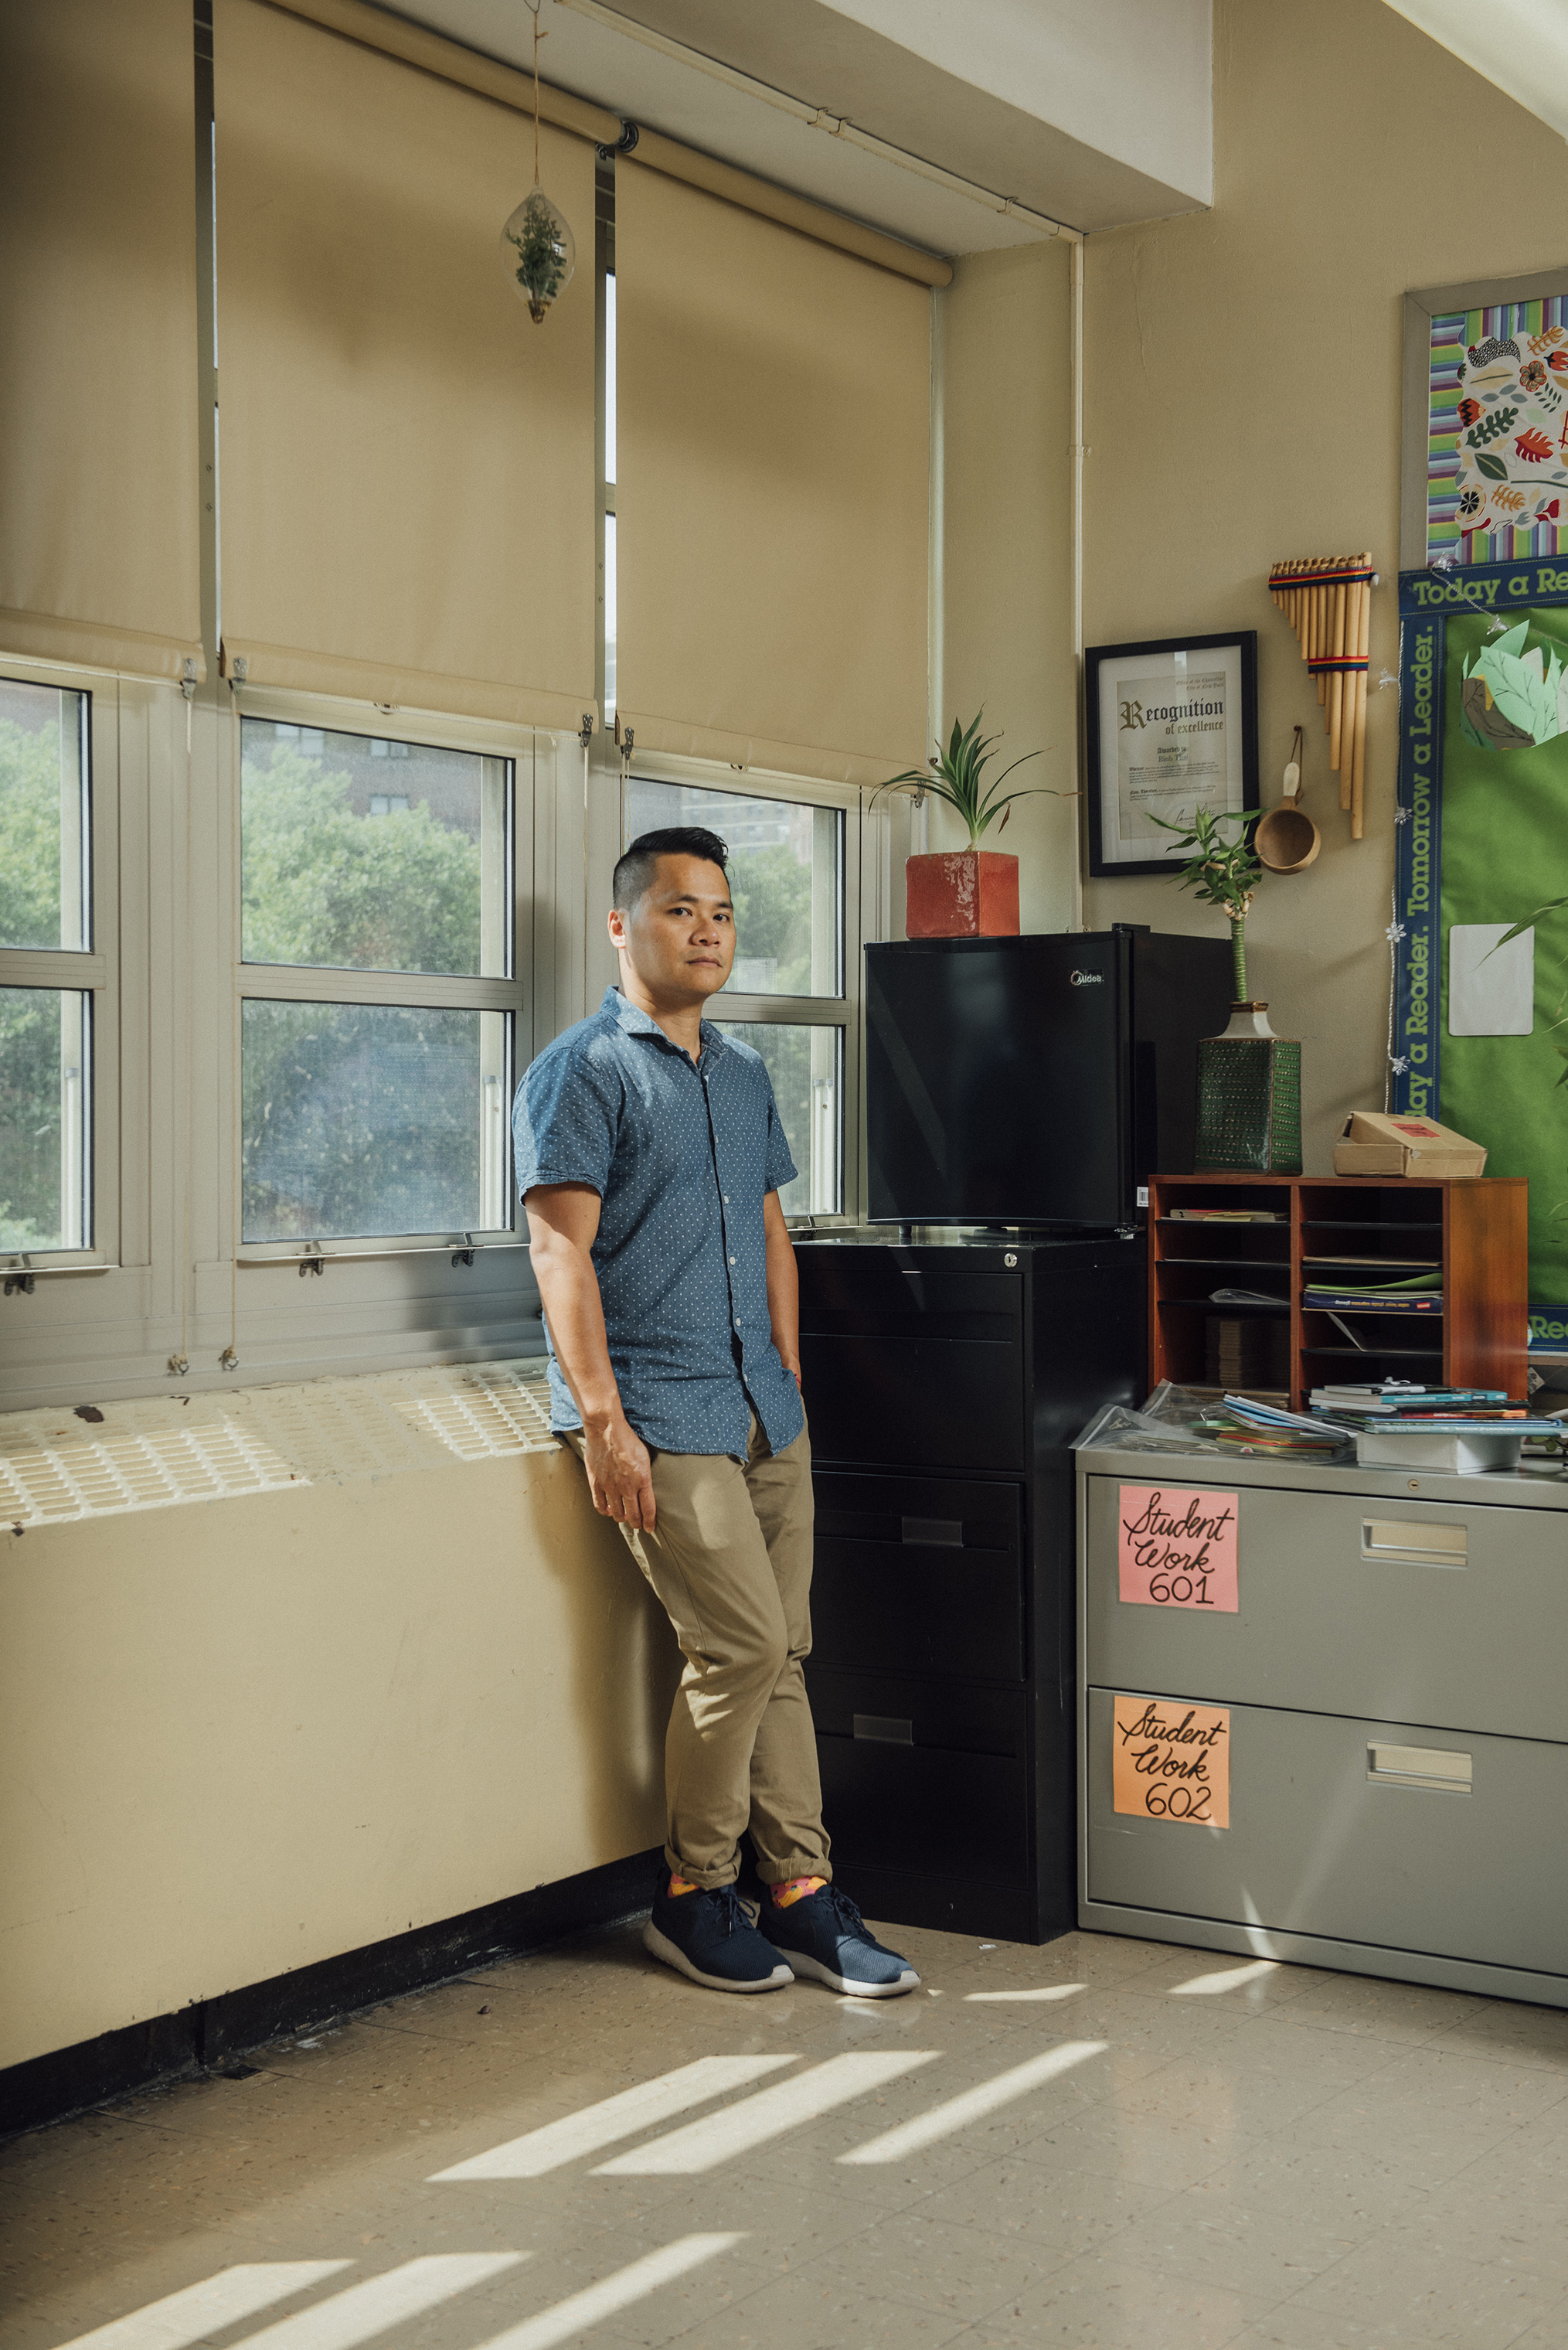 Humanities teacher Binh Thai in his classroom at University Neighborhood Middle School in New York City on Aug. 16. (George Etheredge for TIME)